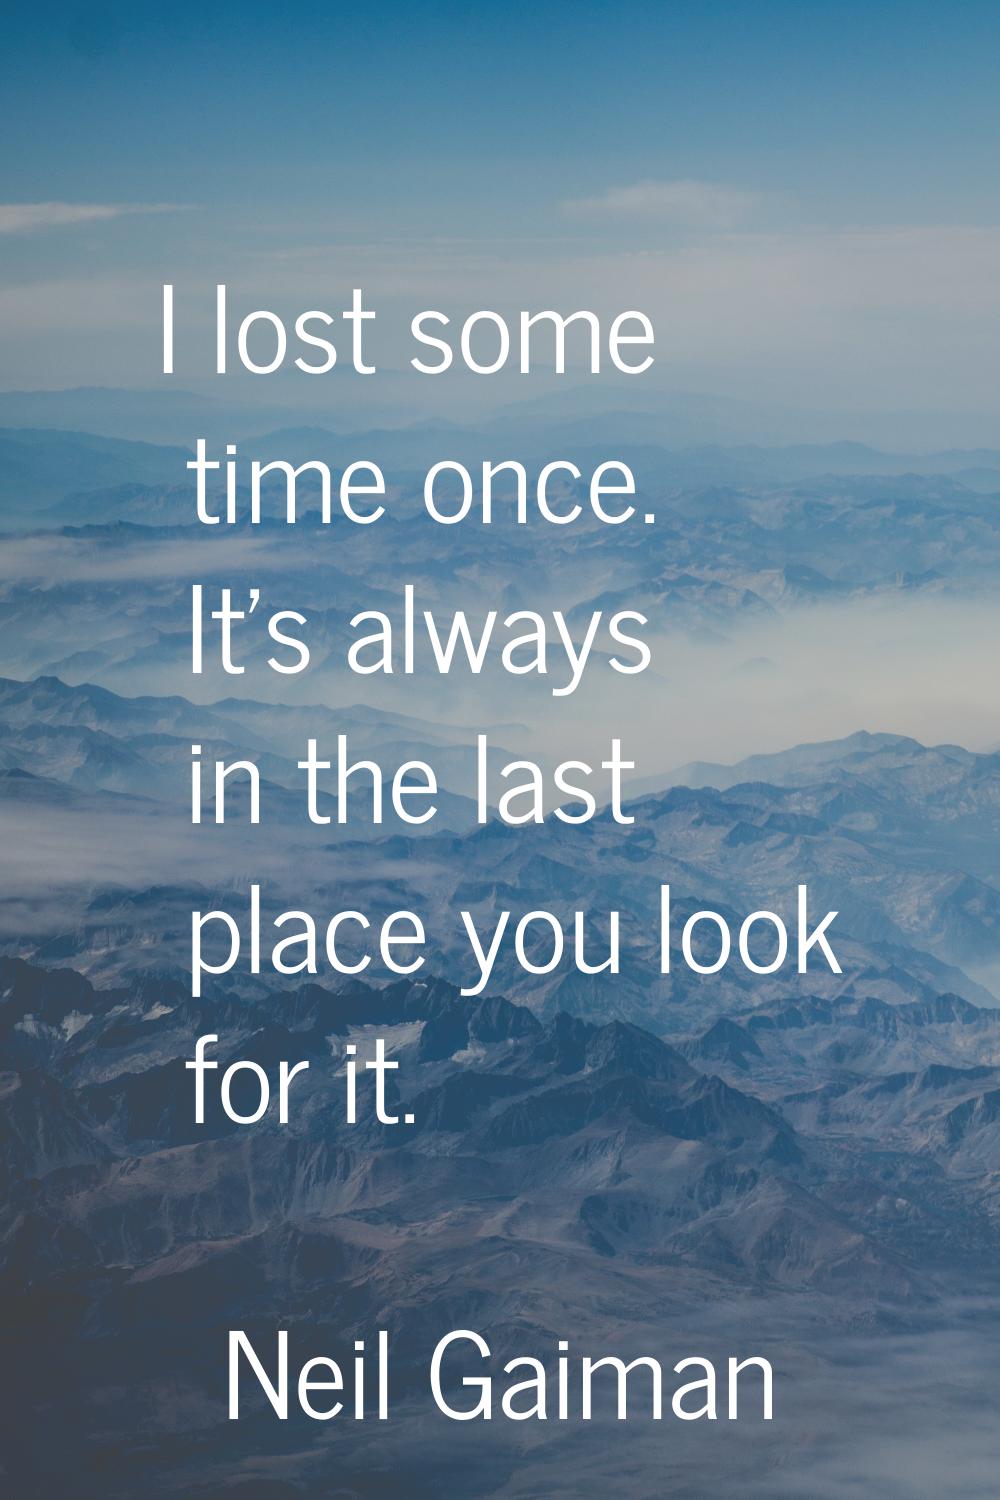 I lost some time once. It's always in the last place you look for it.